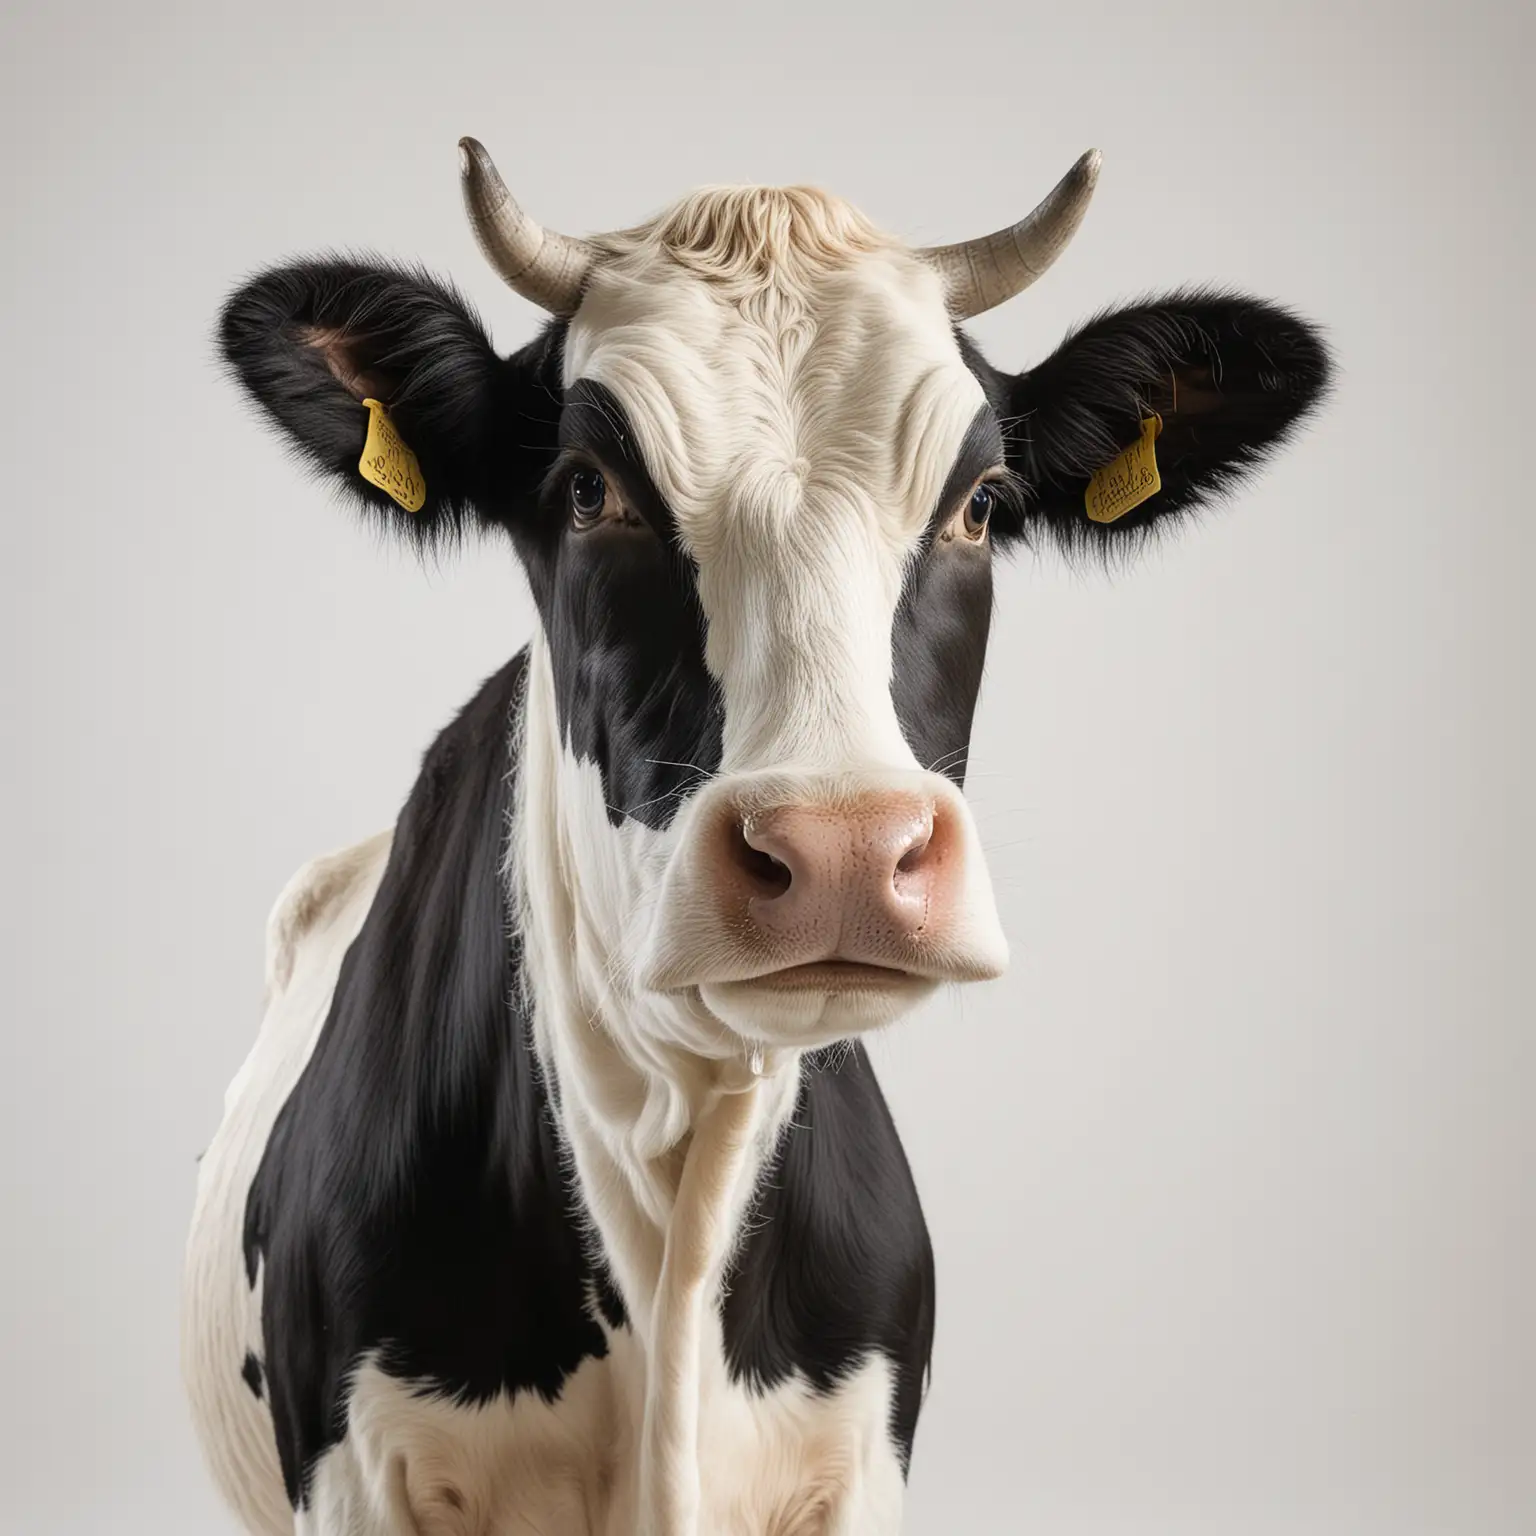 Curious Black and White Cow Looking Sideways on White Background